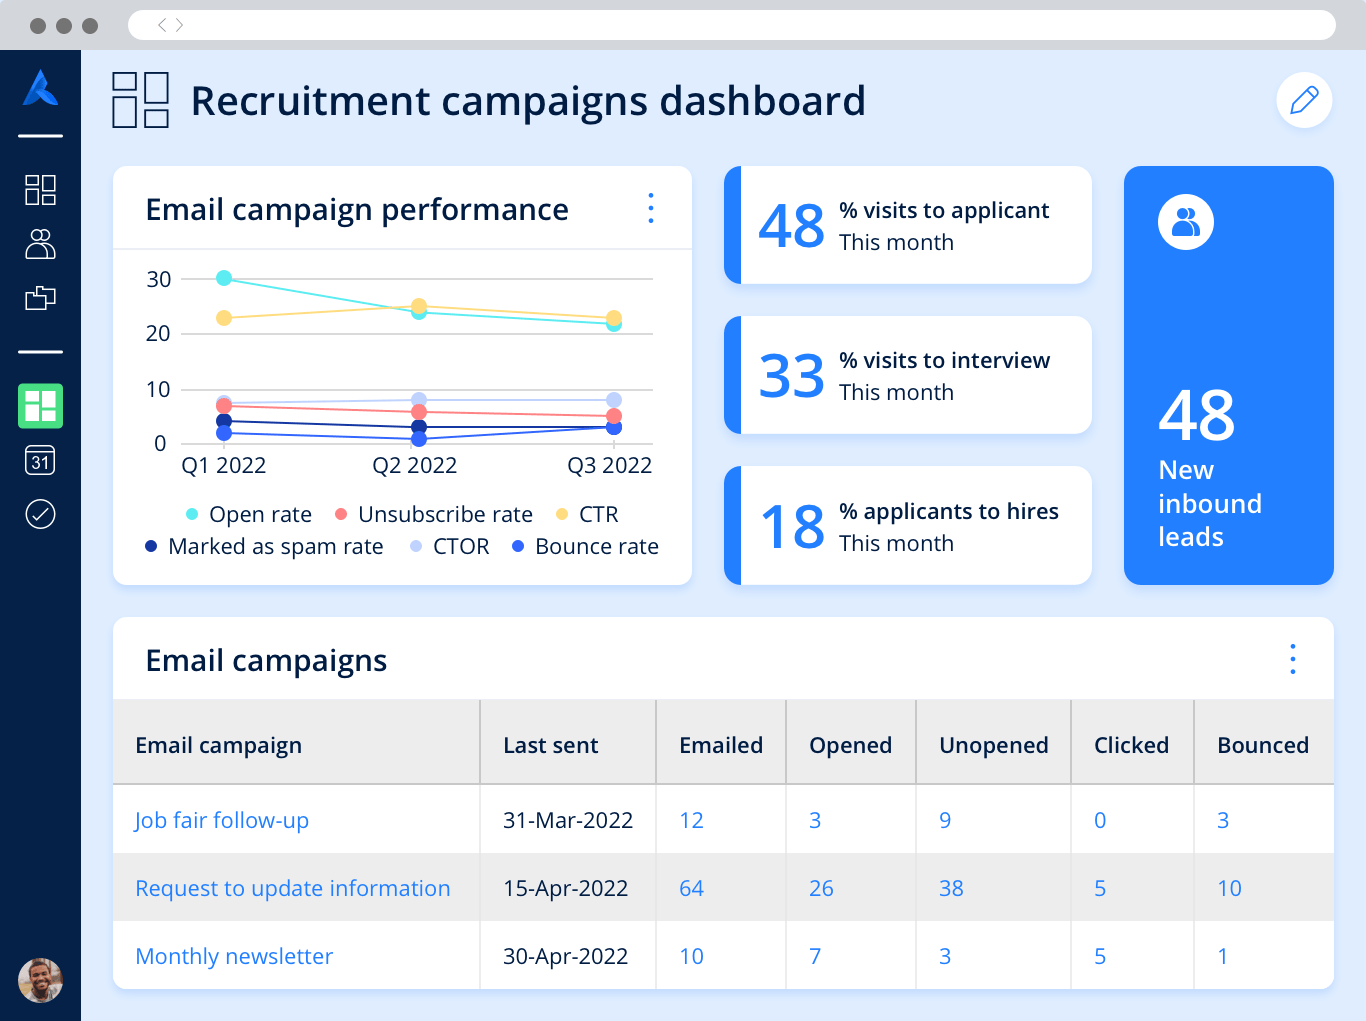 A dashboard with key metrics from a recruitment campaign, including new inbound leads, email campaign performance and more.